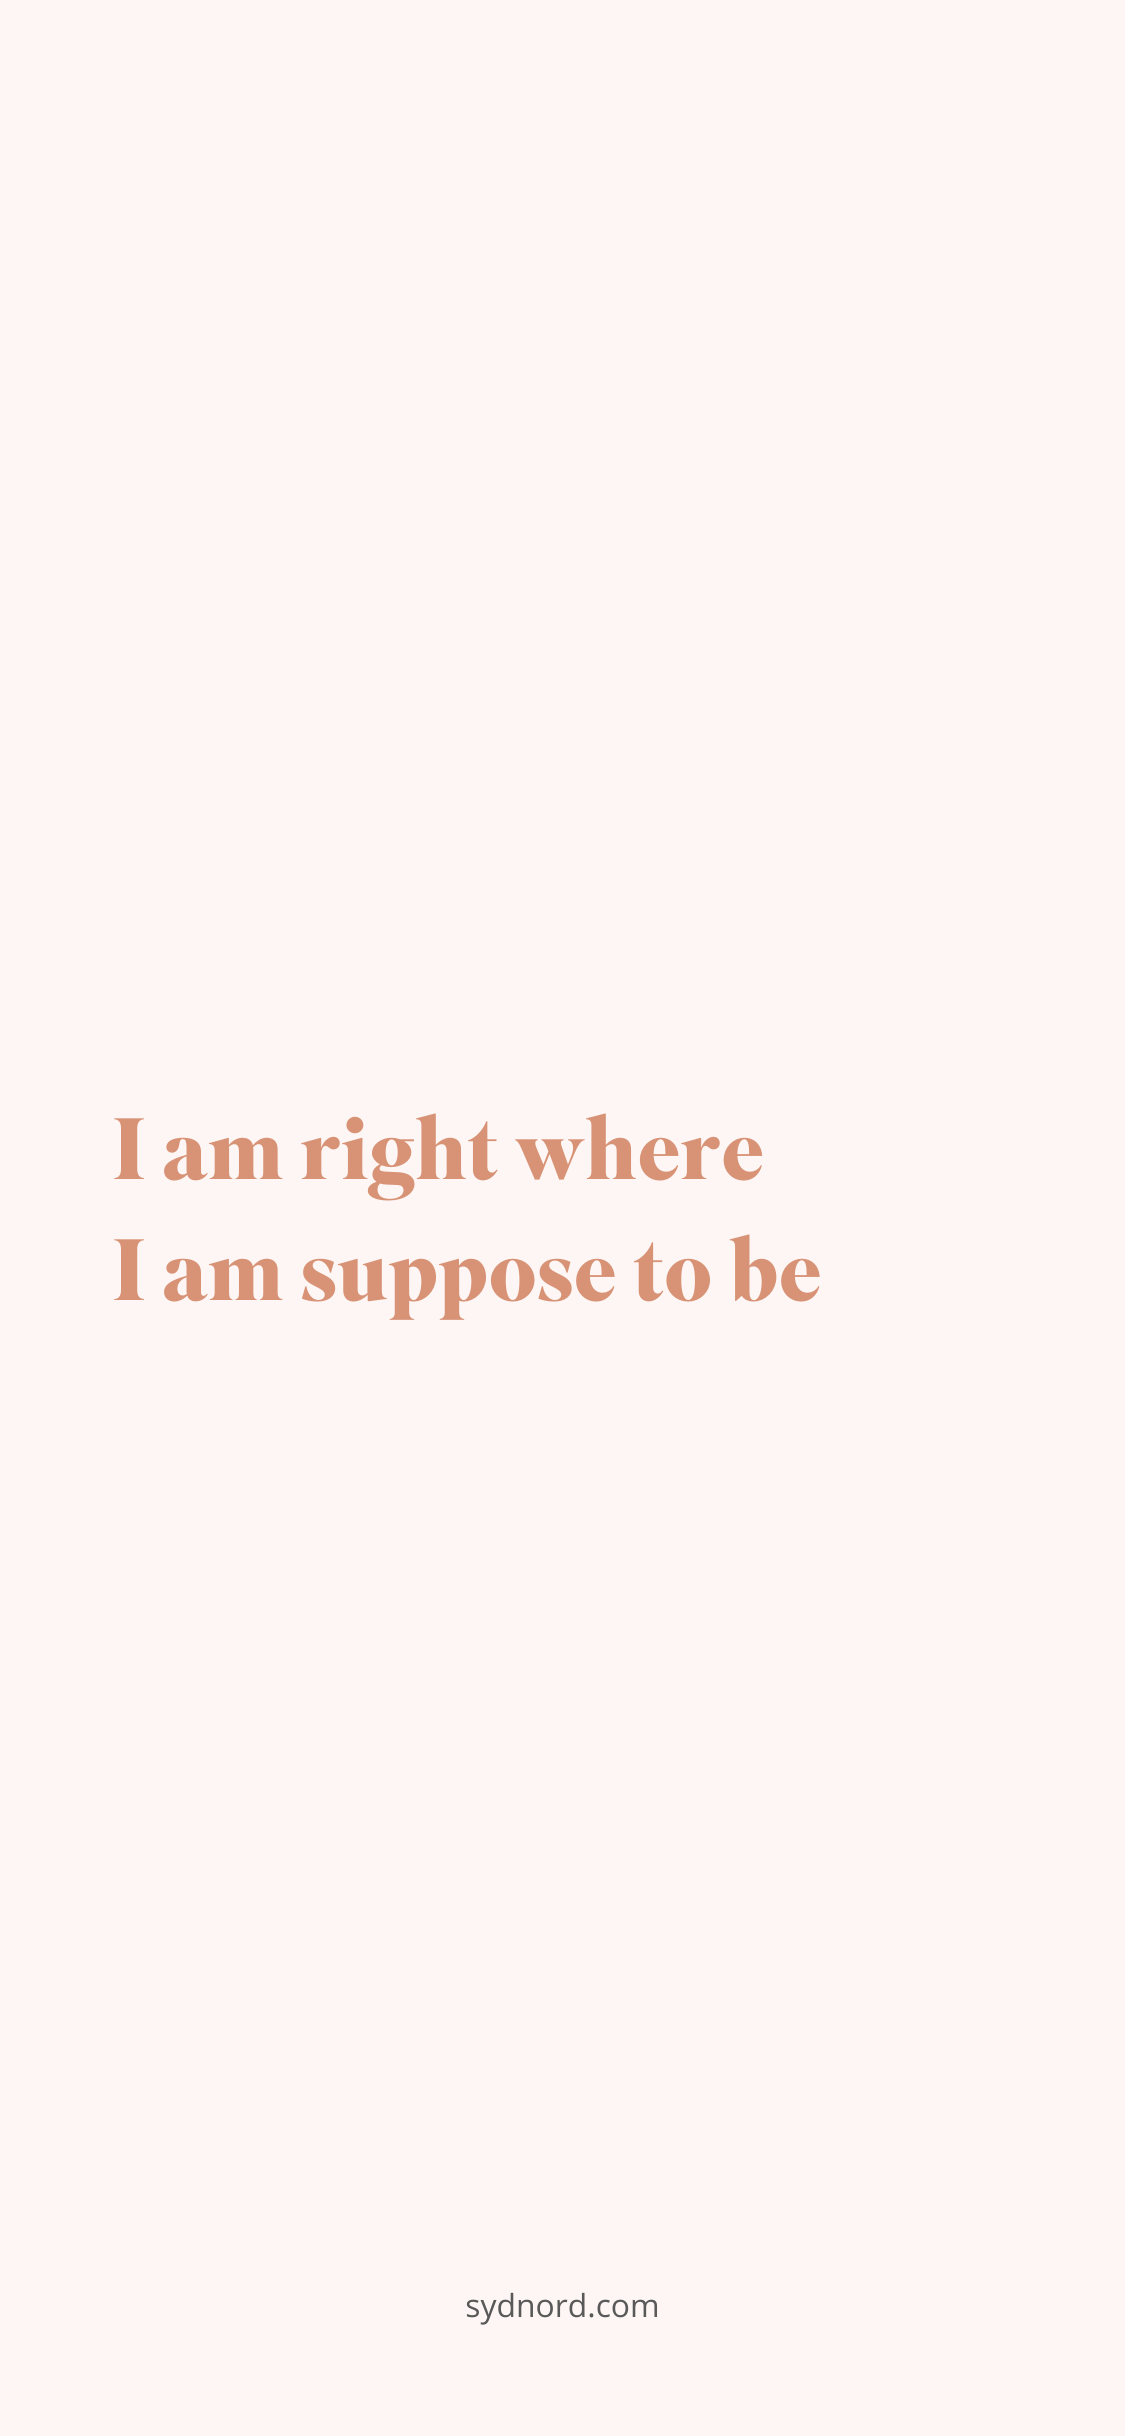 Best positive quotes: I am right where I am suppose to be